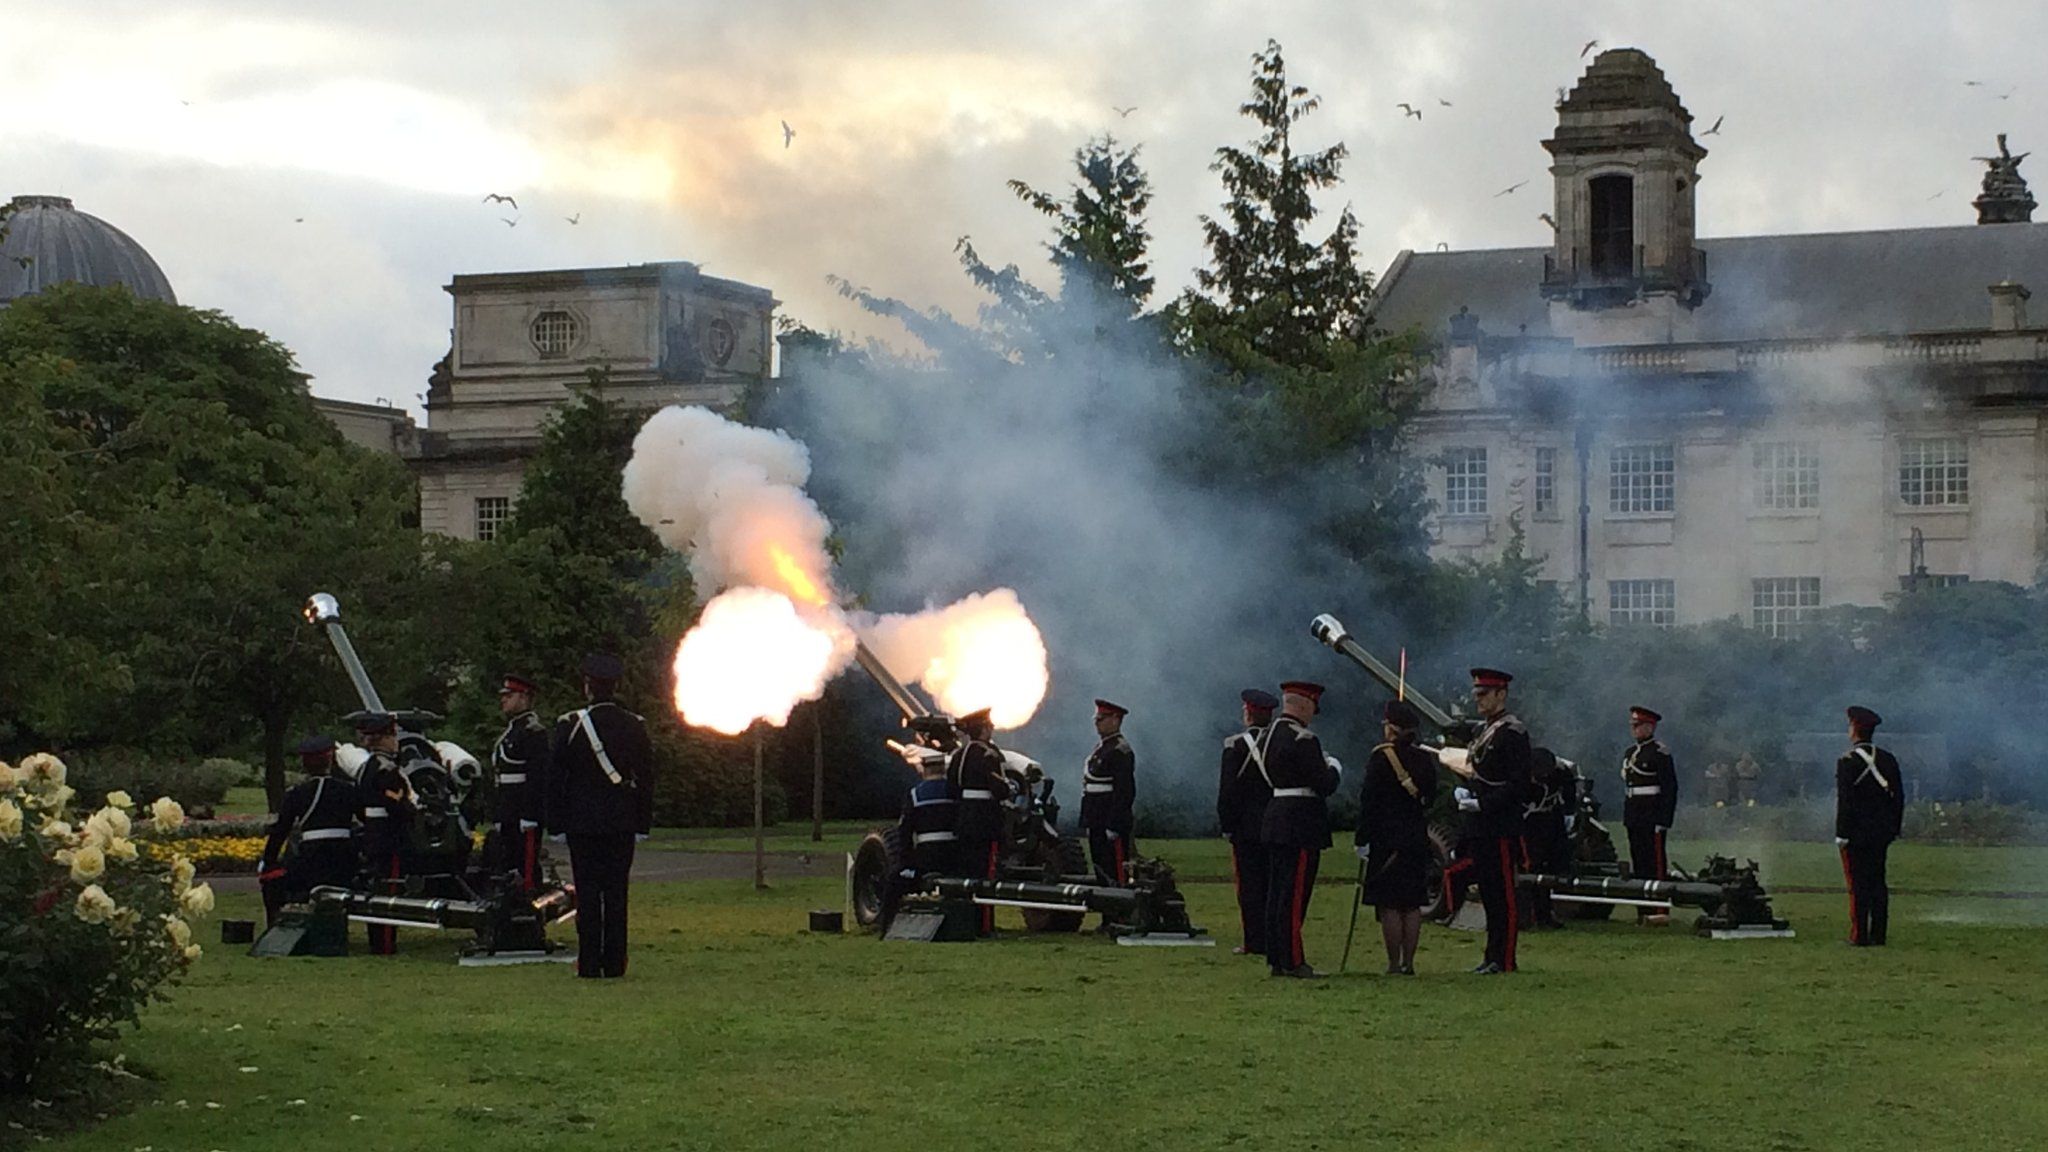 Canons are fired in Alexandra Gardens, Cardiff